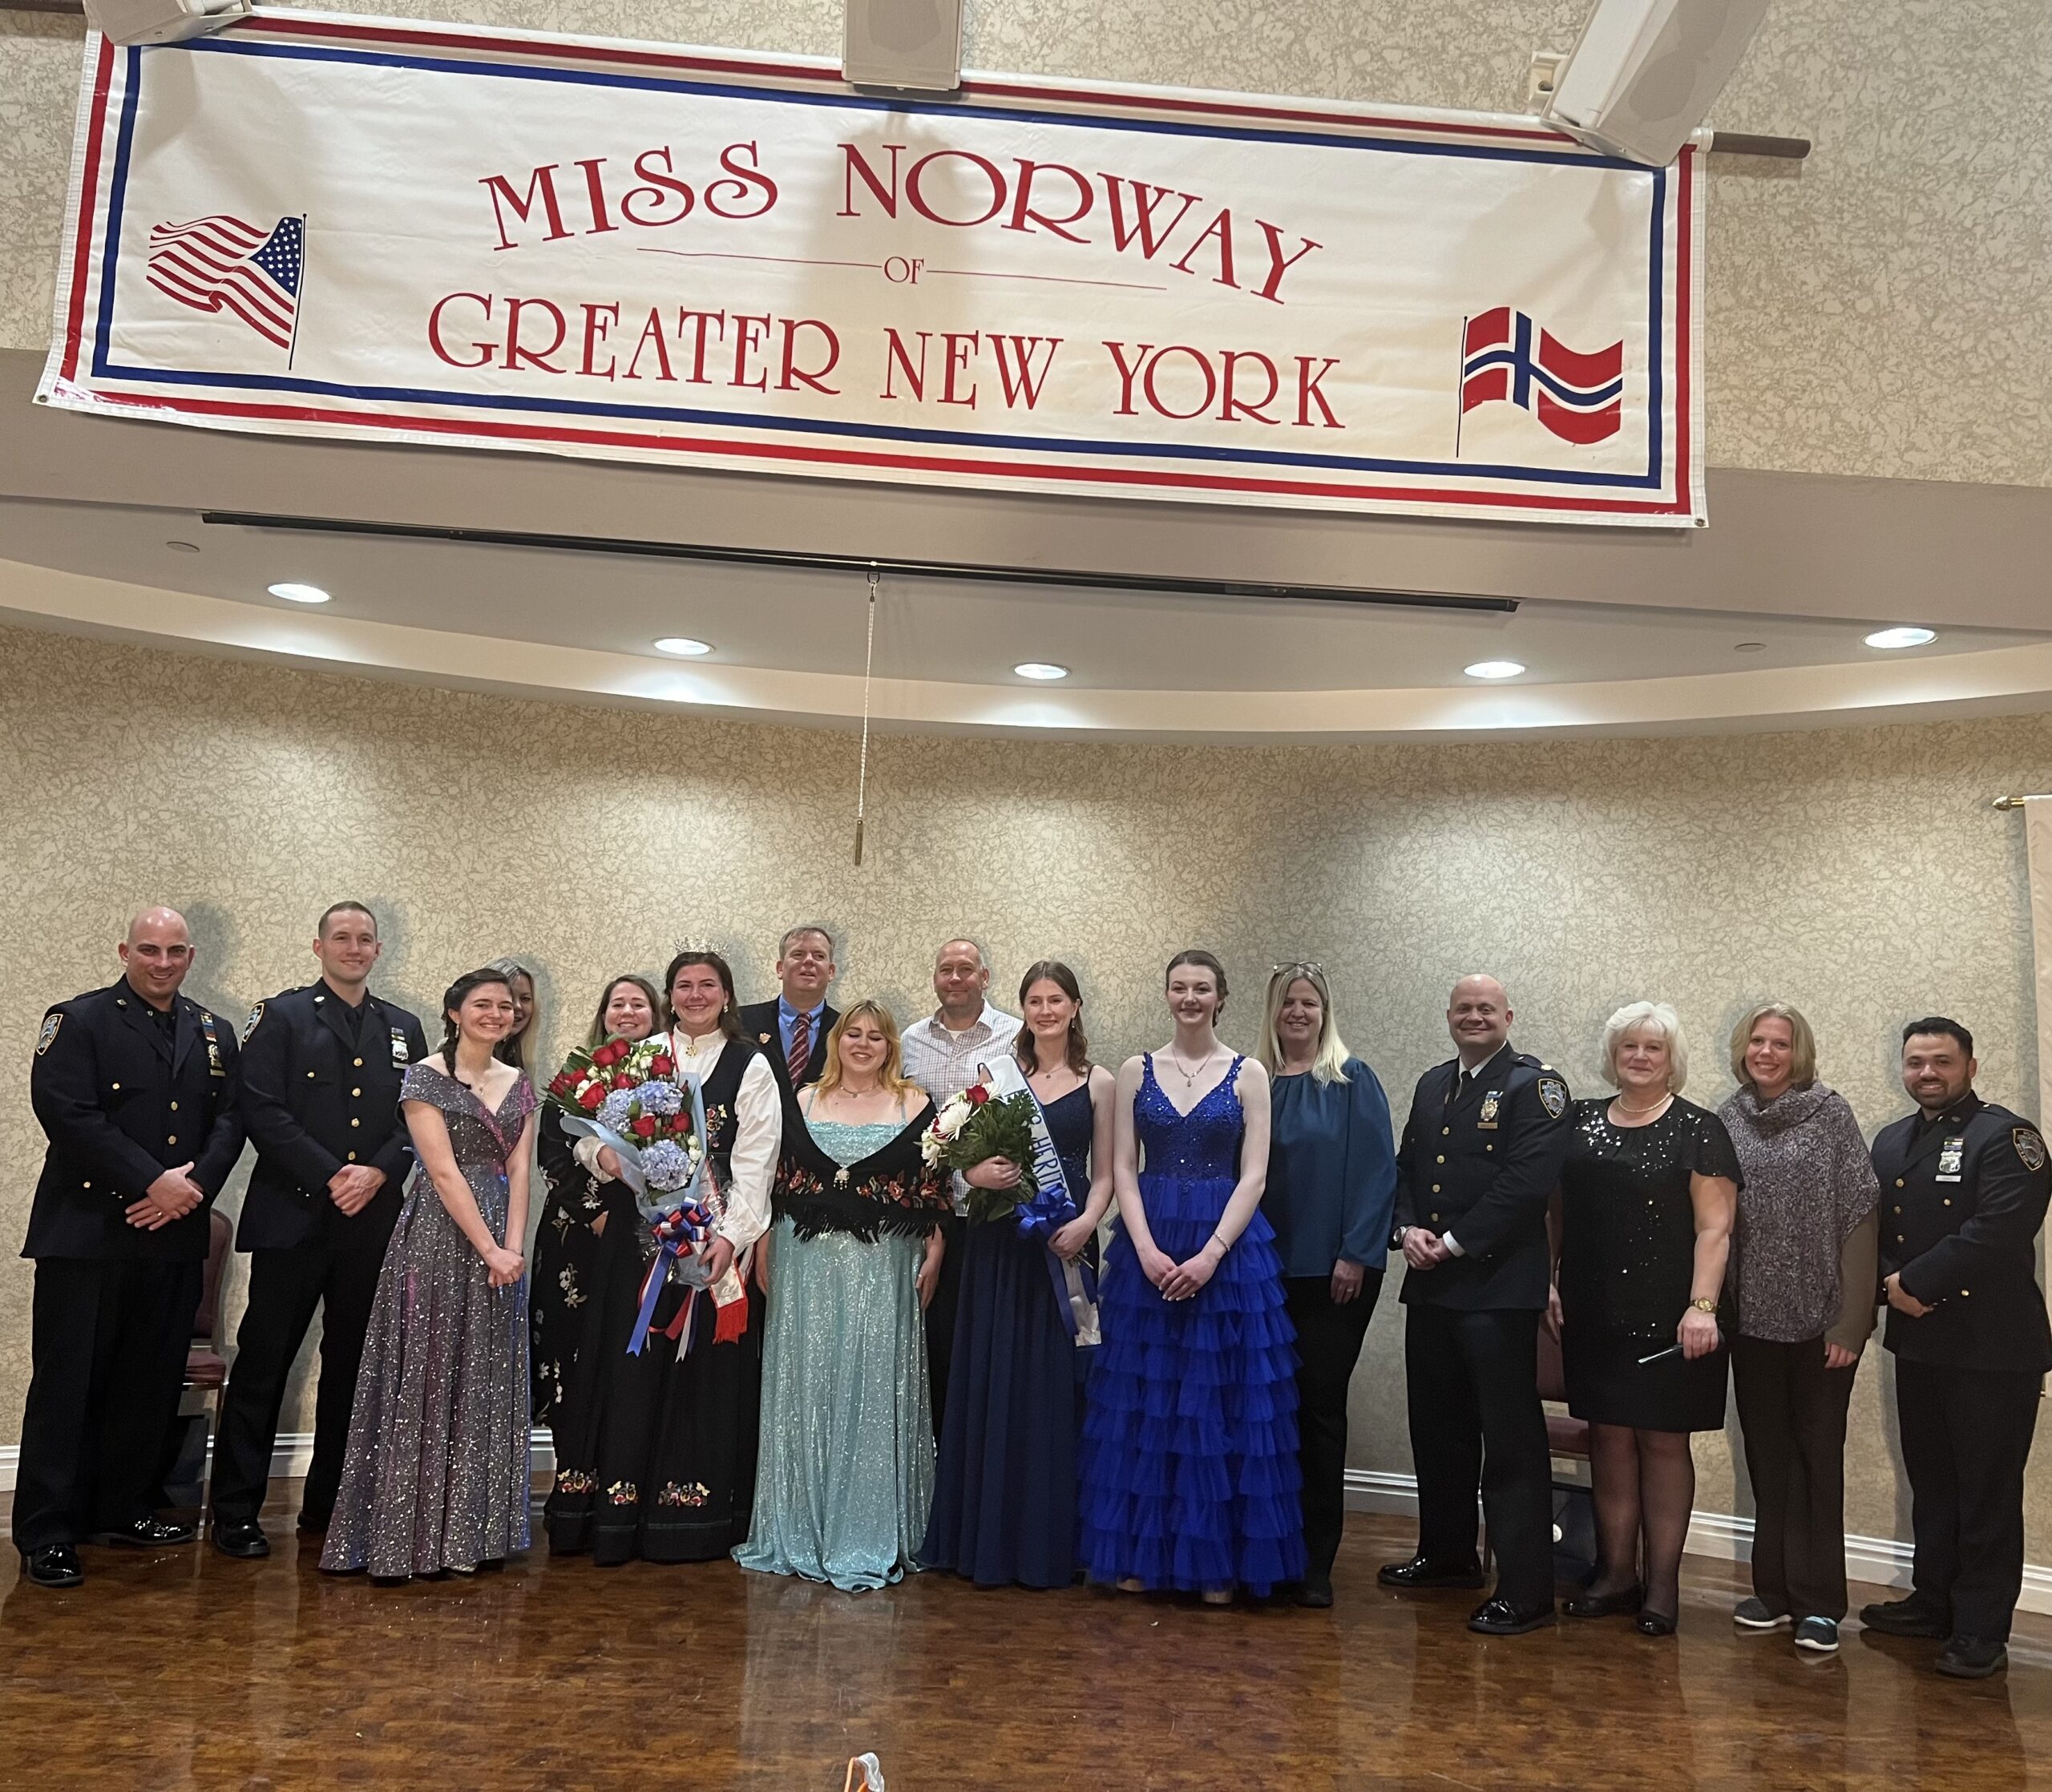 Contest participants, judges, members of the Viking Association Police Dept., and Miss Norway of Greater New York Committee members.Brooklyn Eagle photo by Wayne Daren Schneiderman